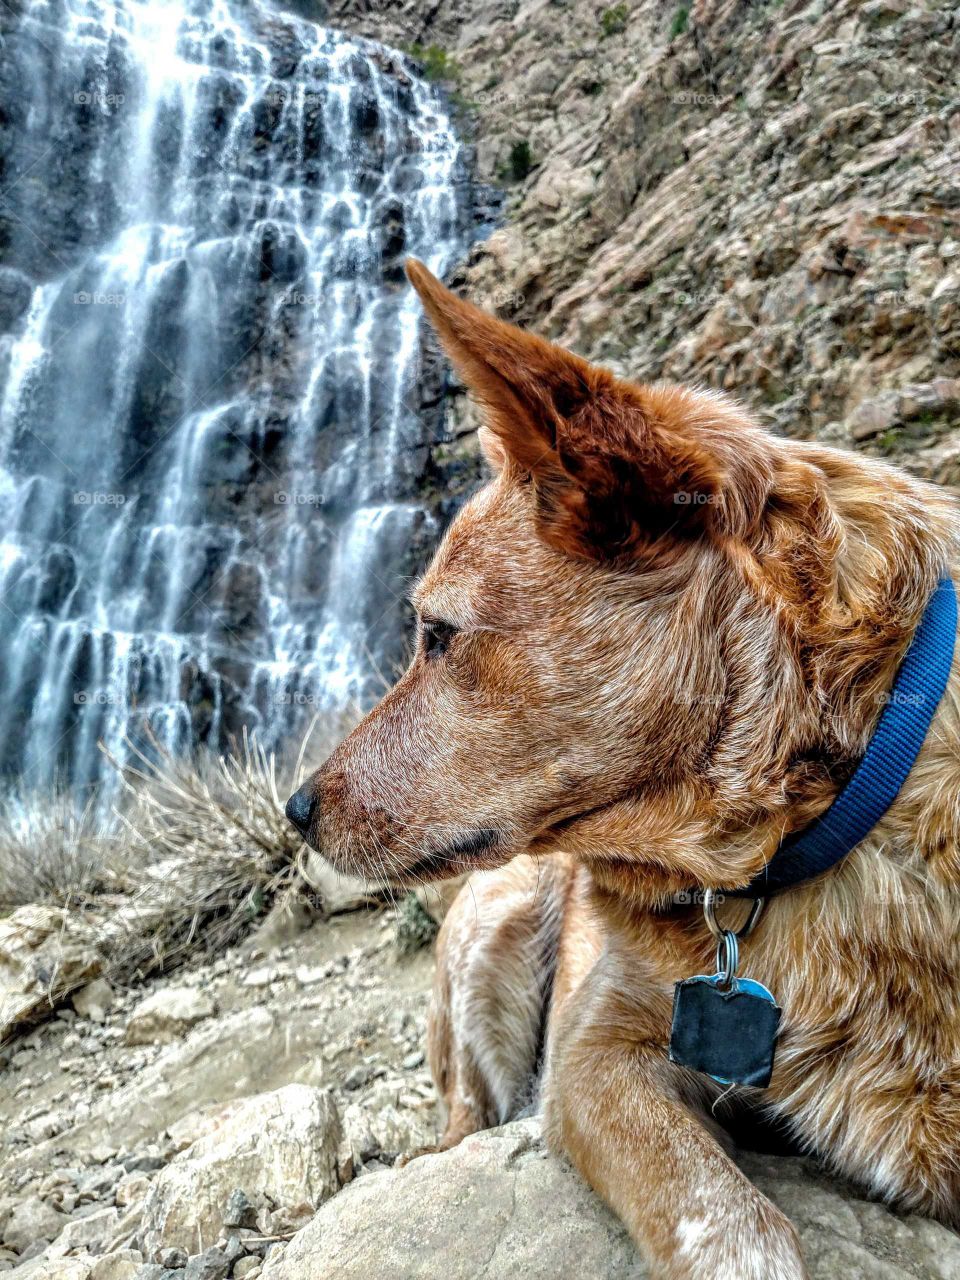 Red wheeler dog by waterfall